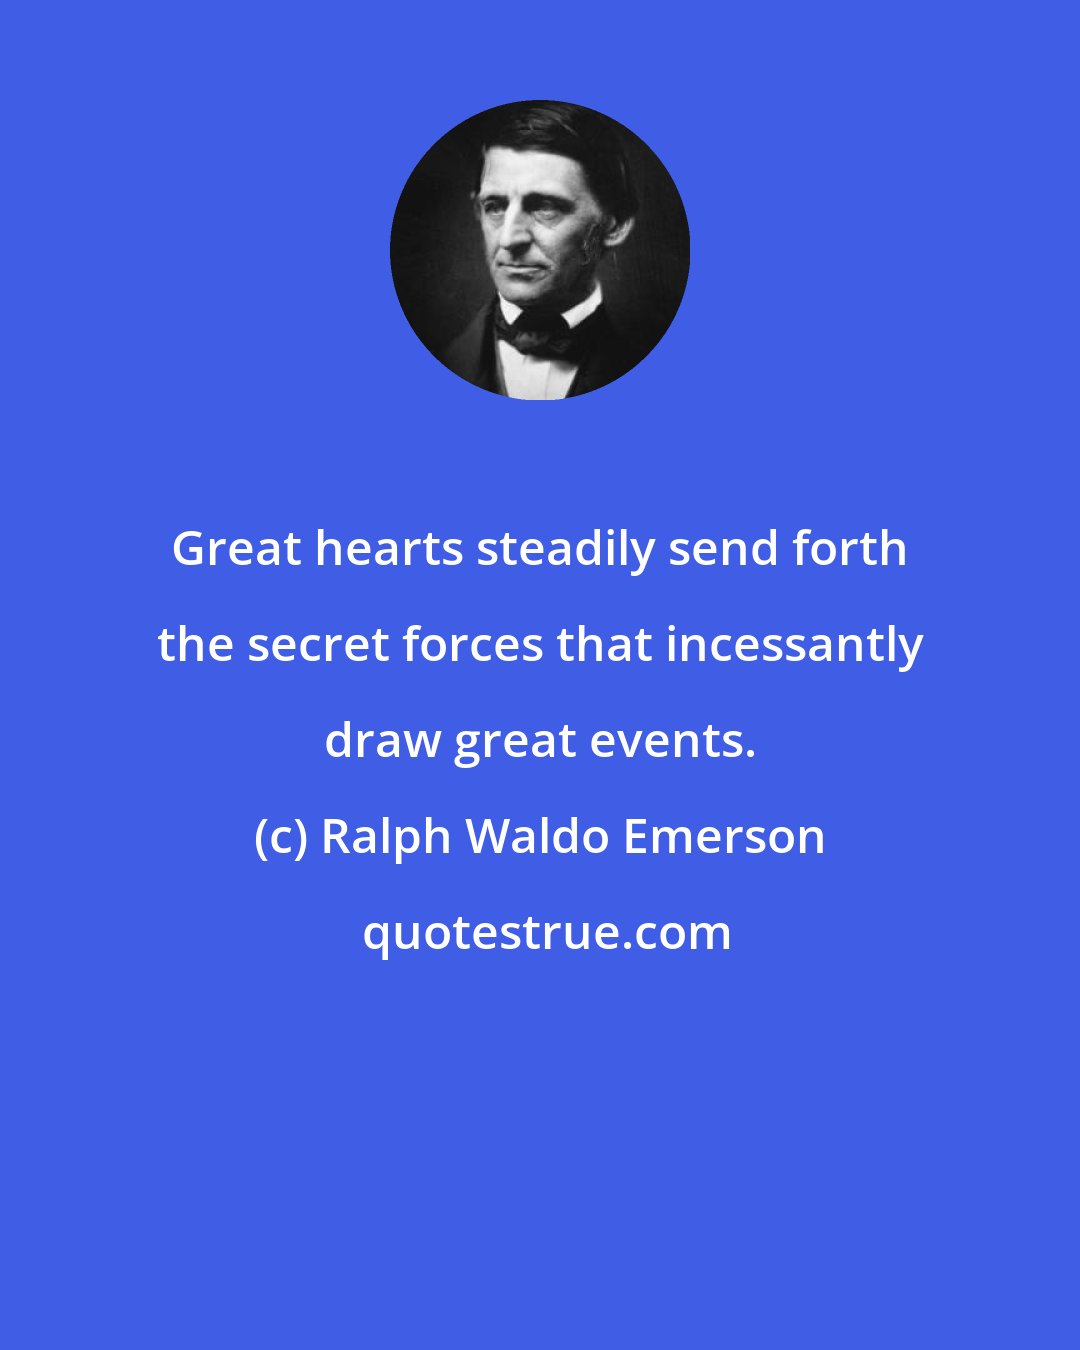 Ralph Waldo Emerson: Great hearts steadily send forth the secret forces that incessantly draw great events.